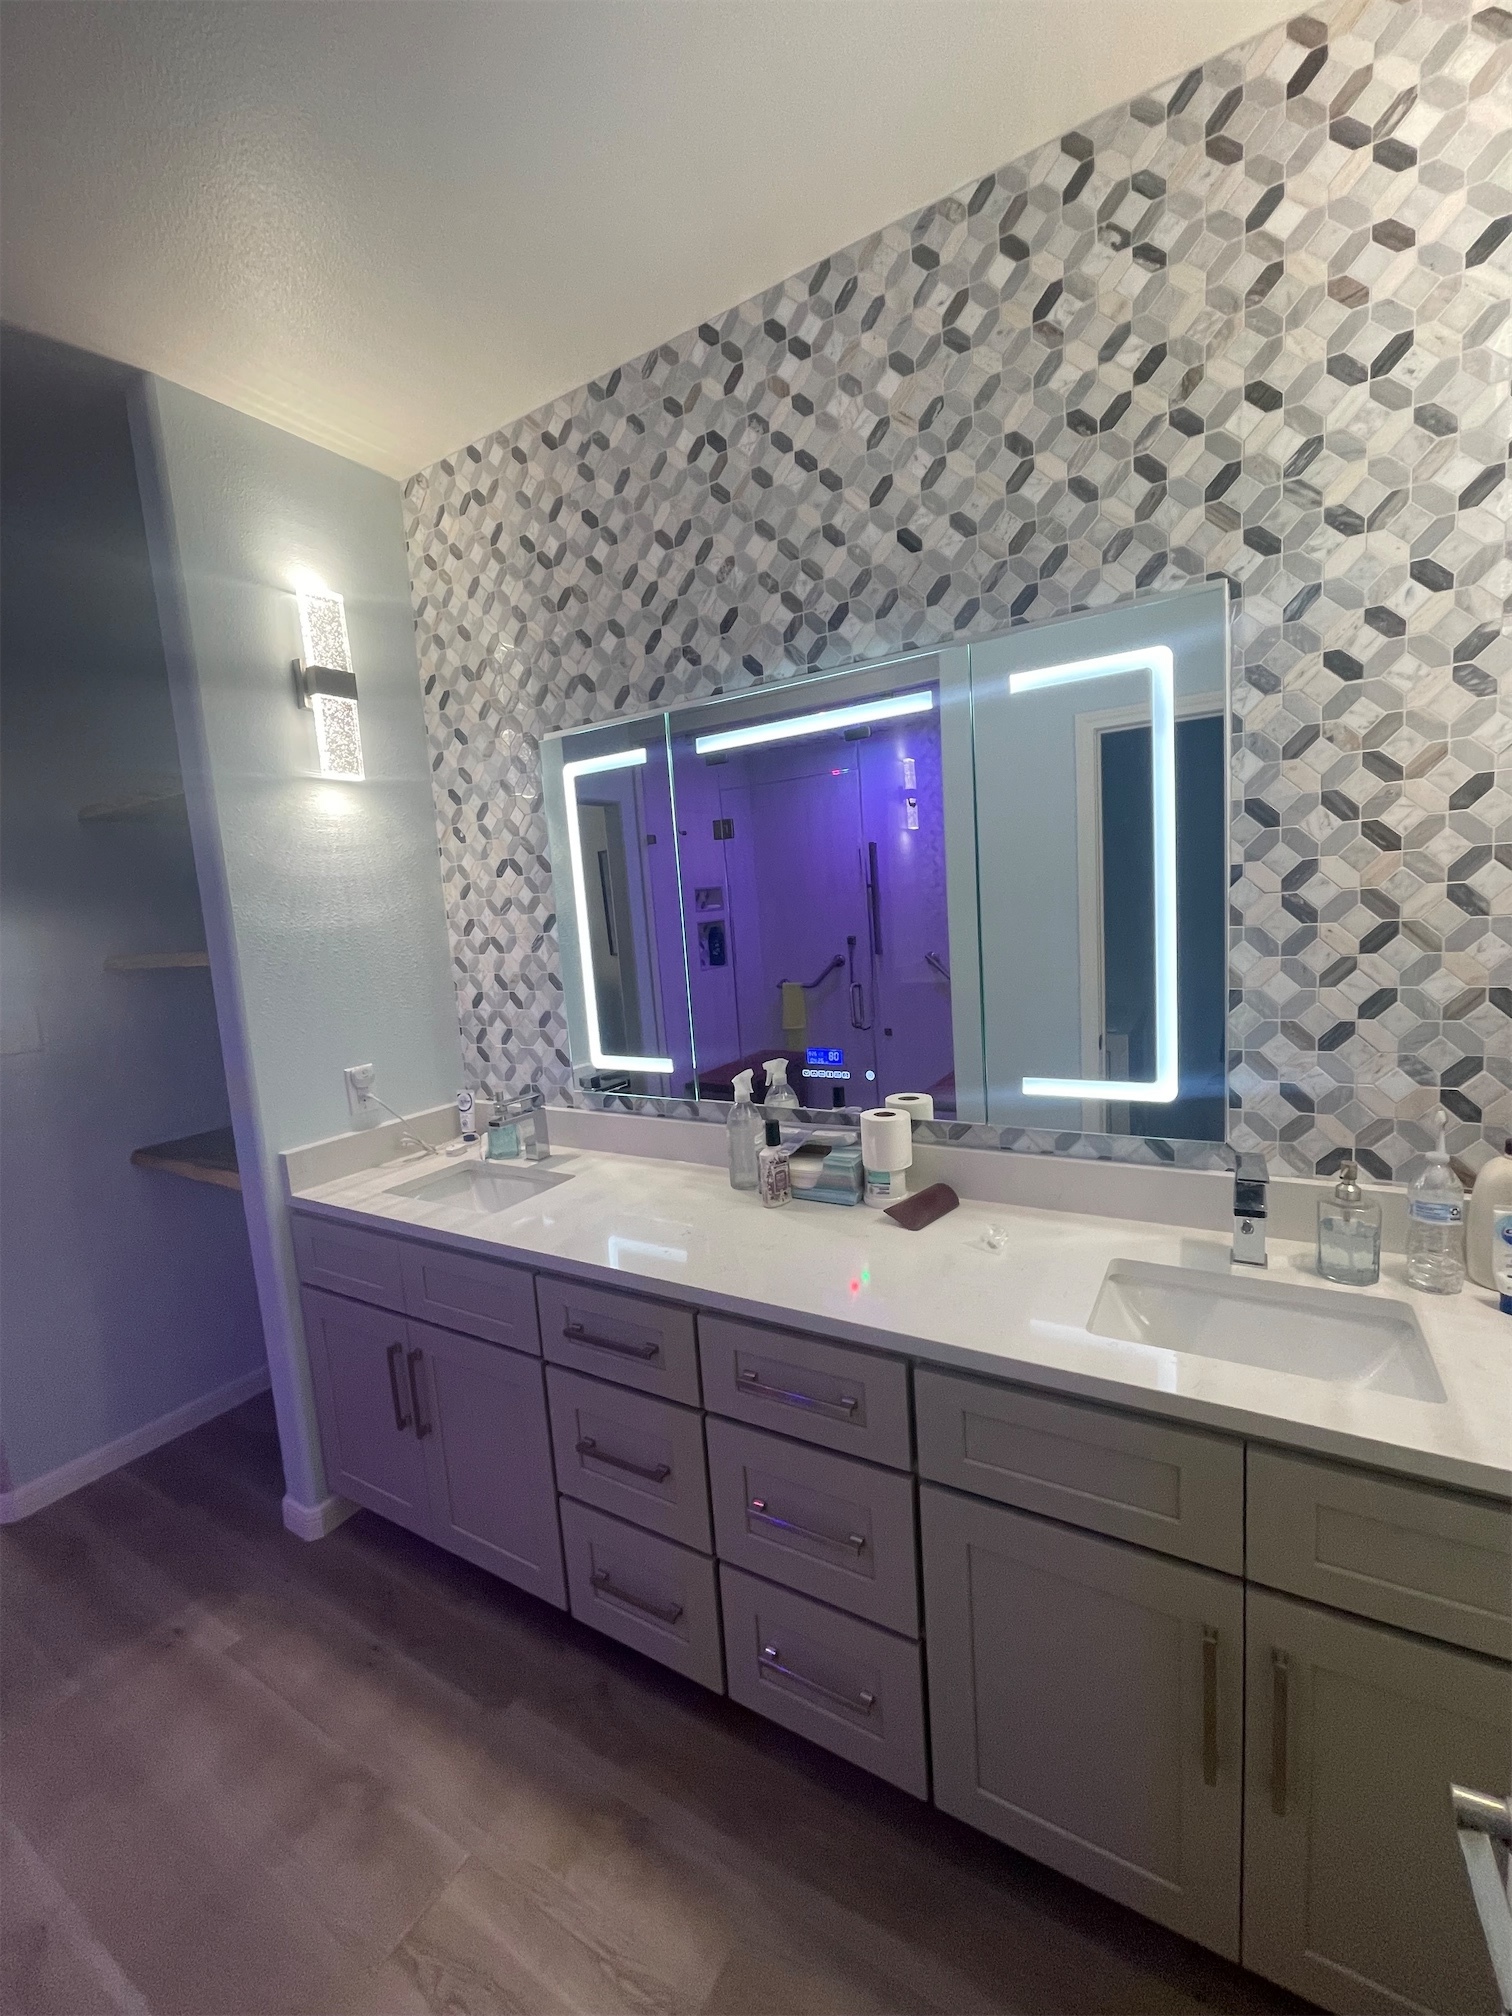 Lighted mirror in a remodeled bathroom